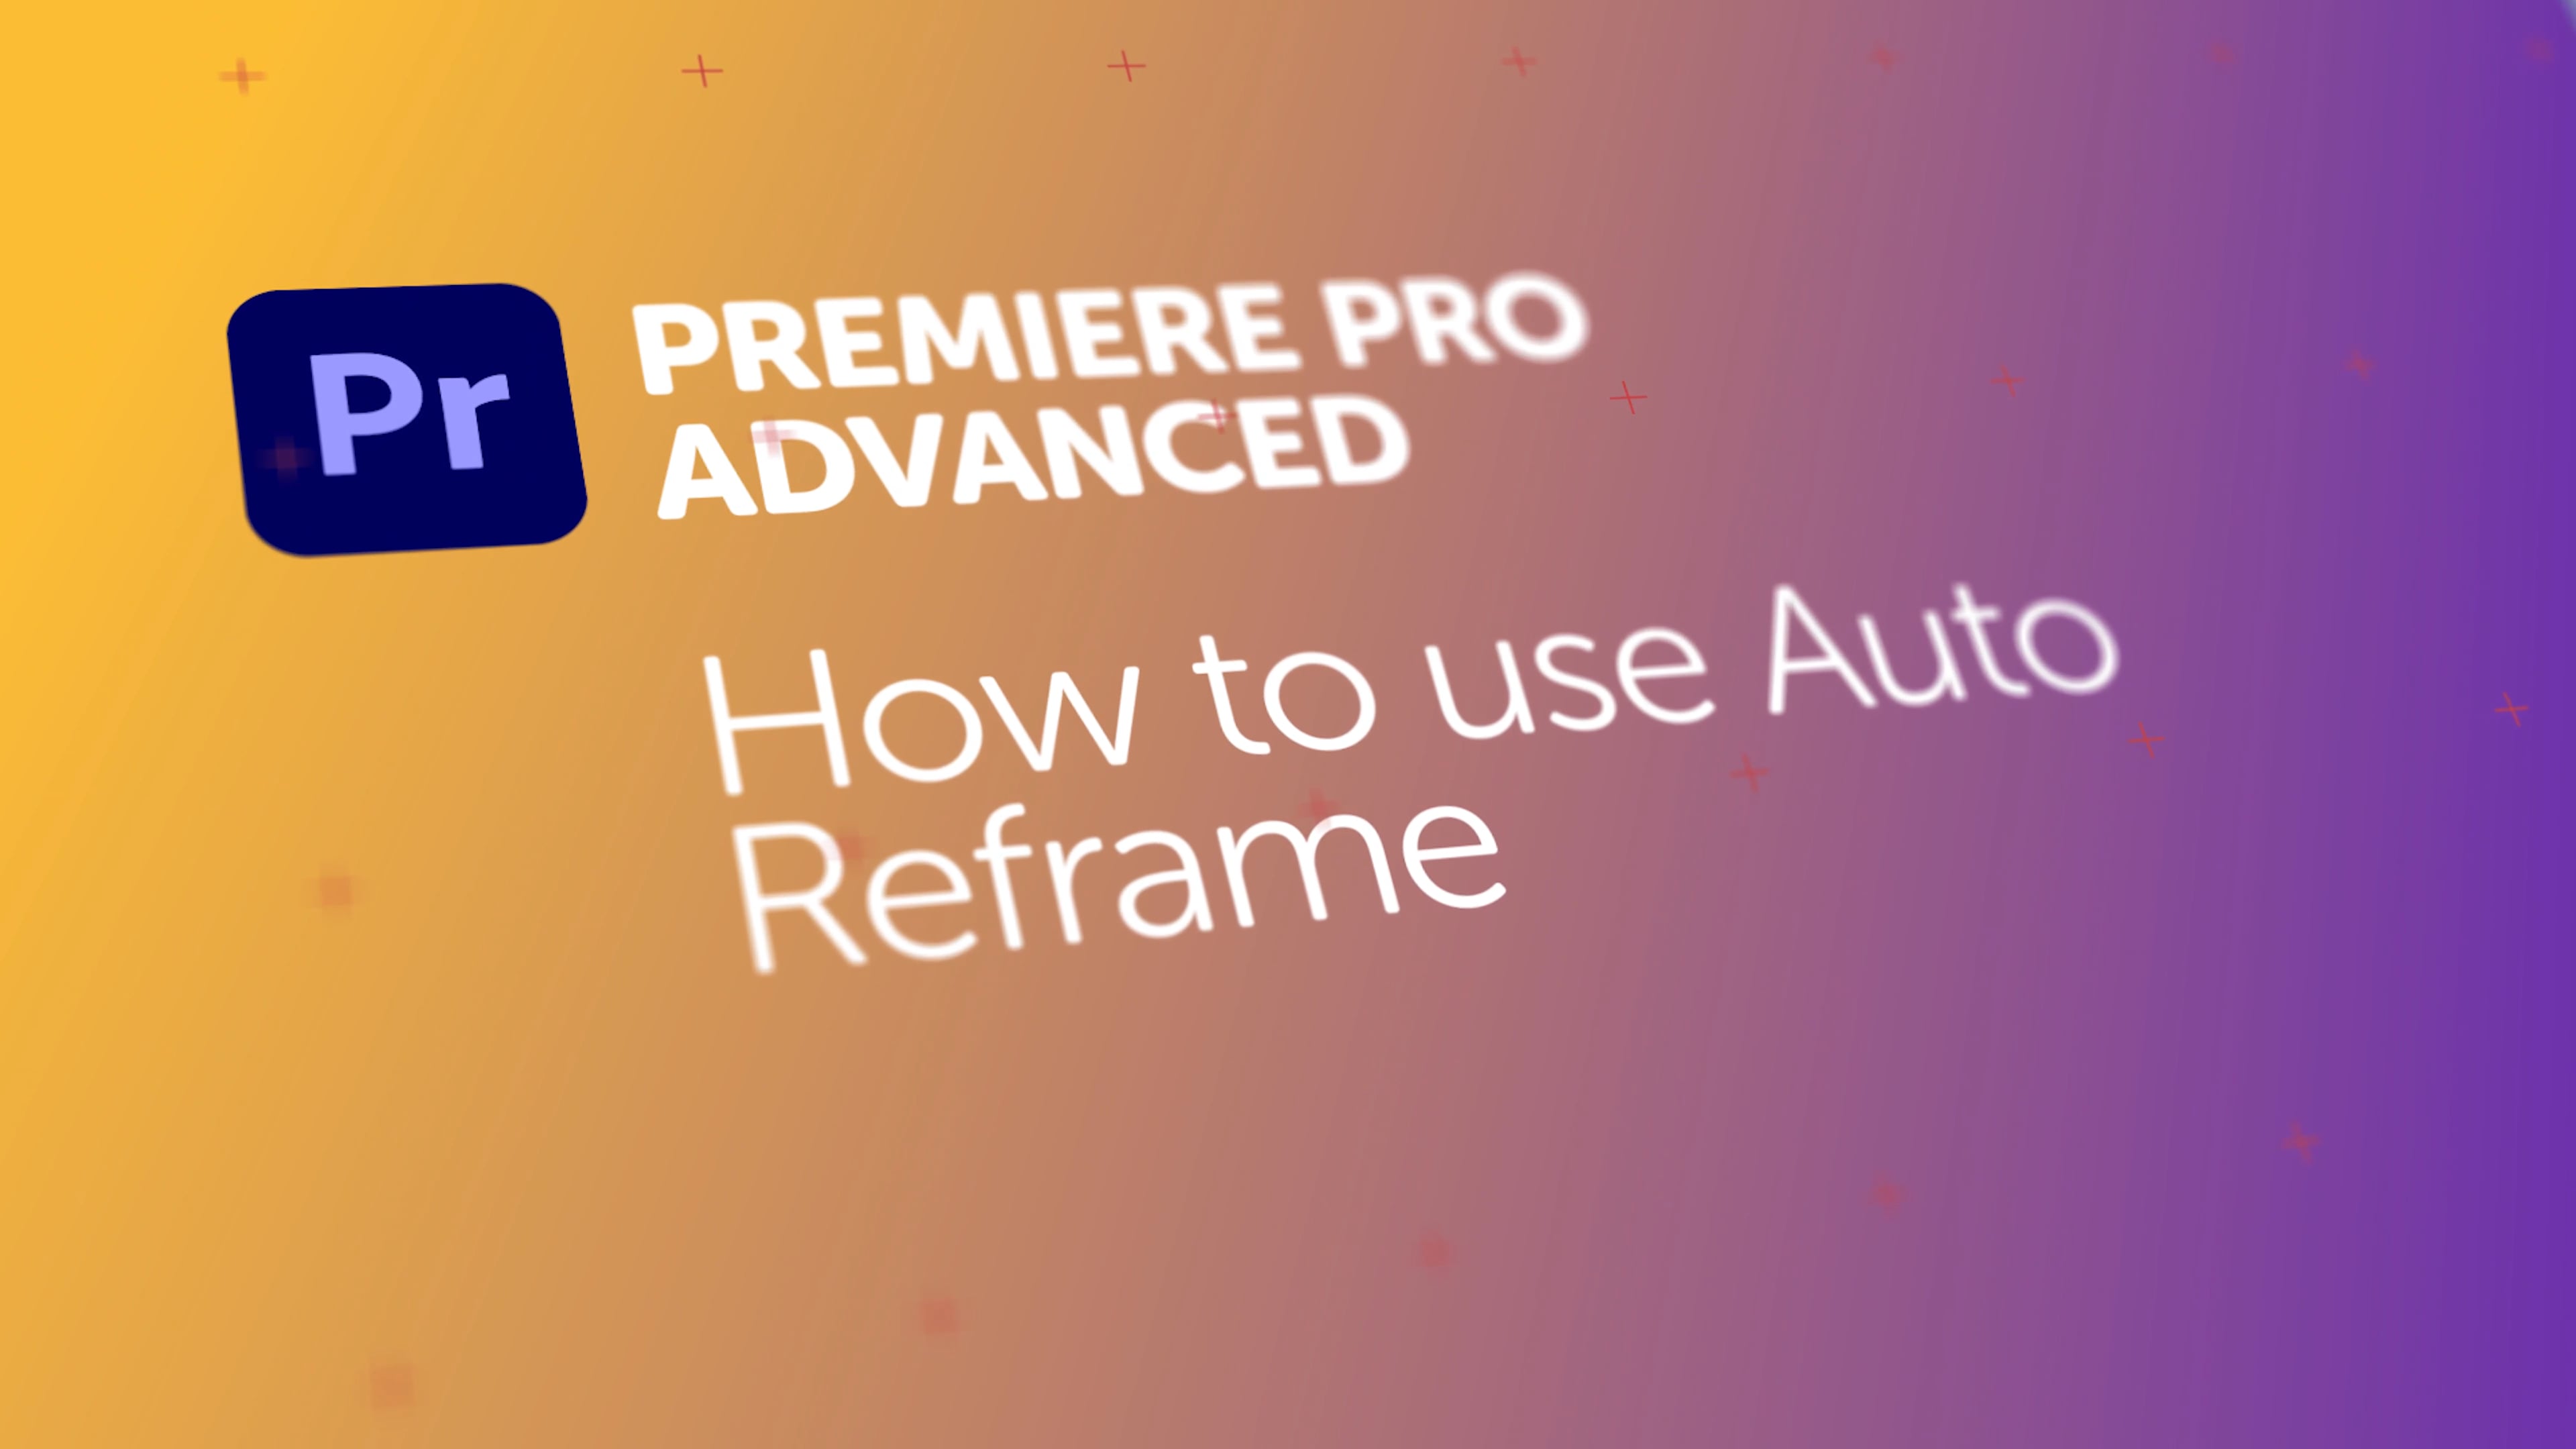 How to use Auto Reframe in Premiere Pro